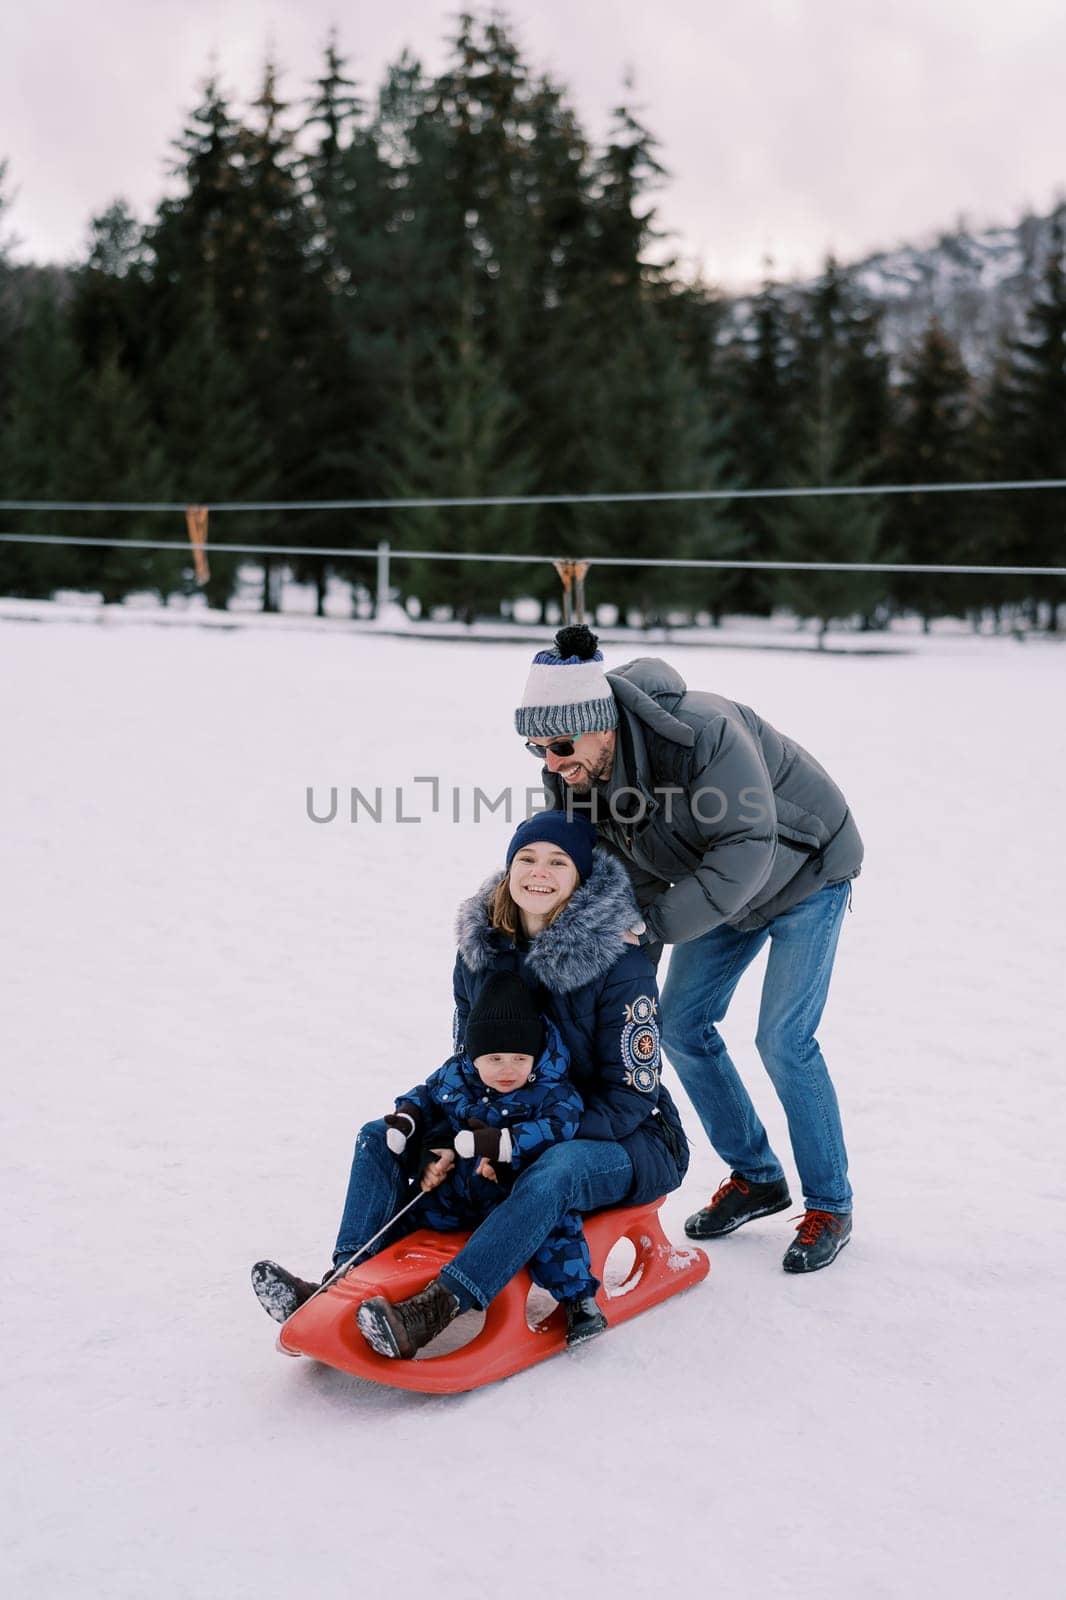 Dad pushes a smiling mom with a little boy on a sled down a snowy hill. High quality photo